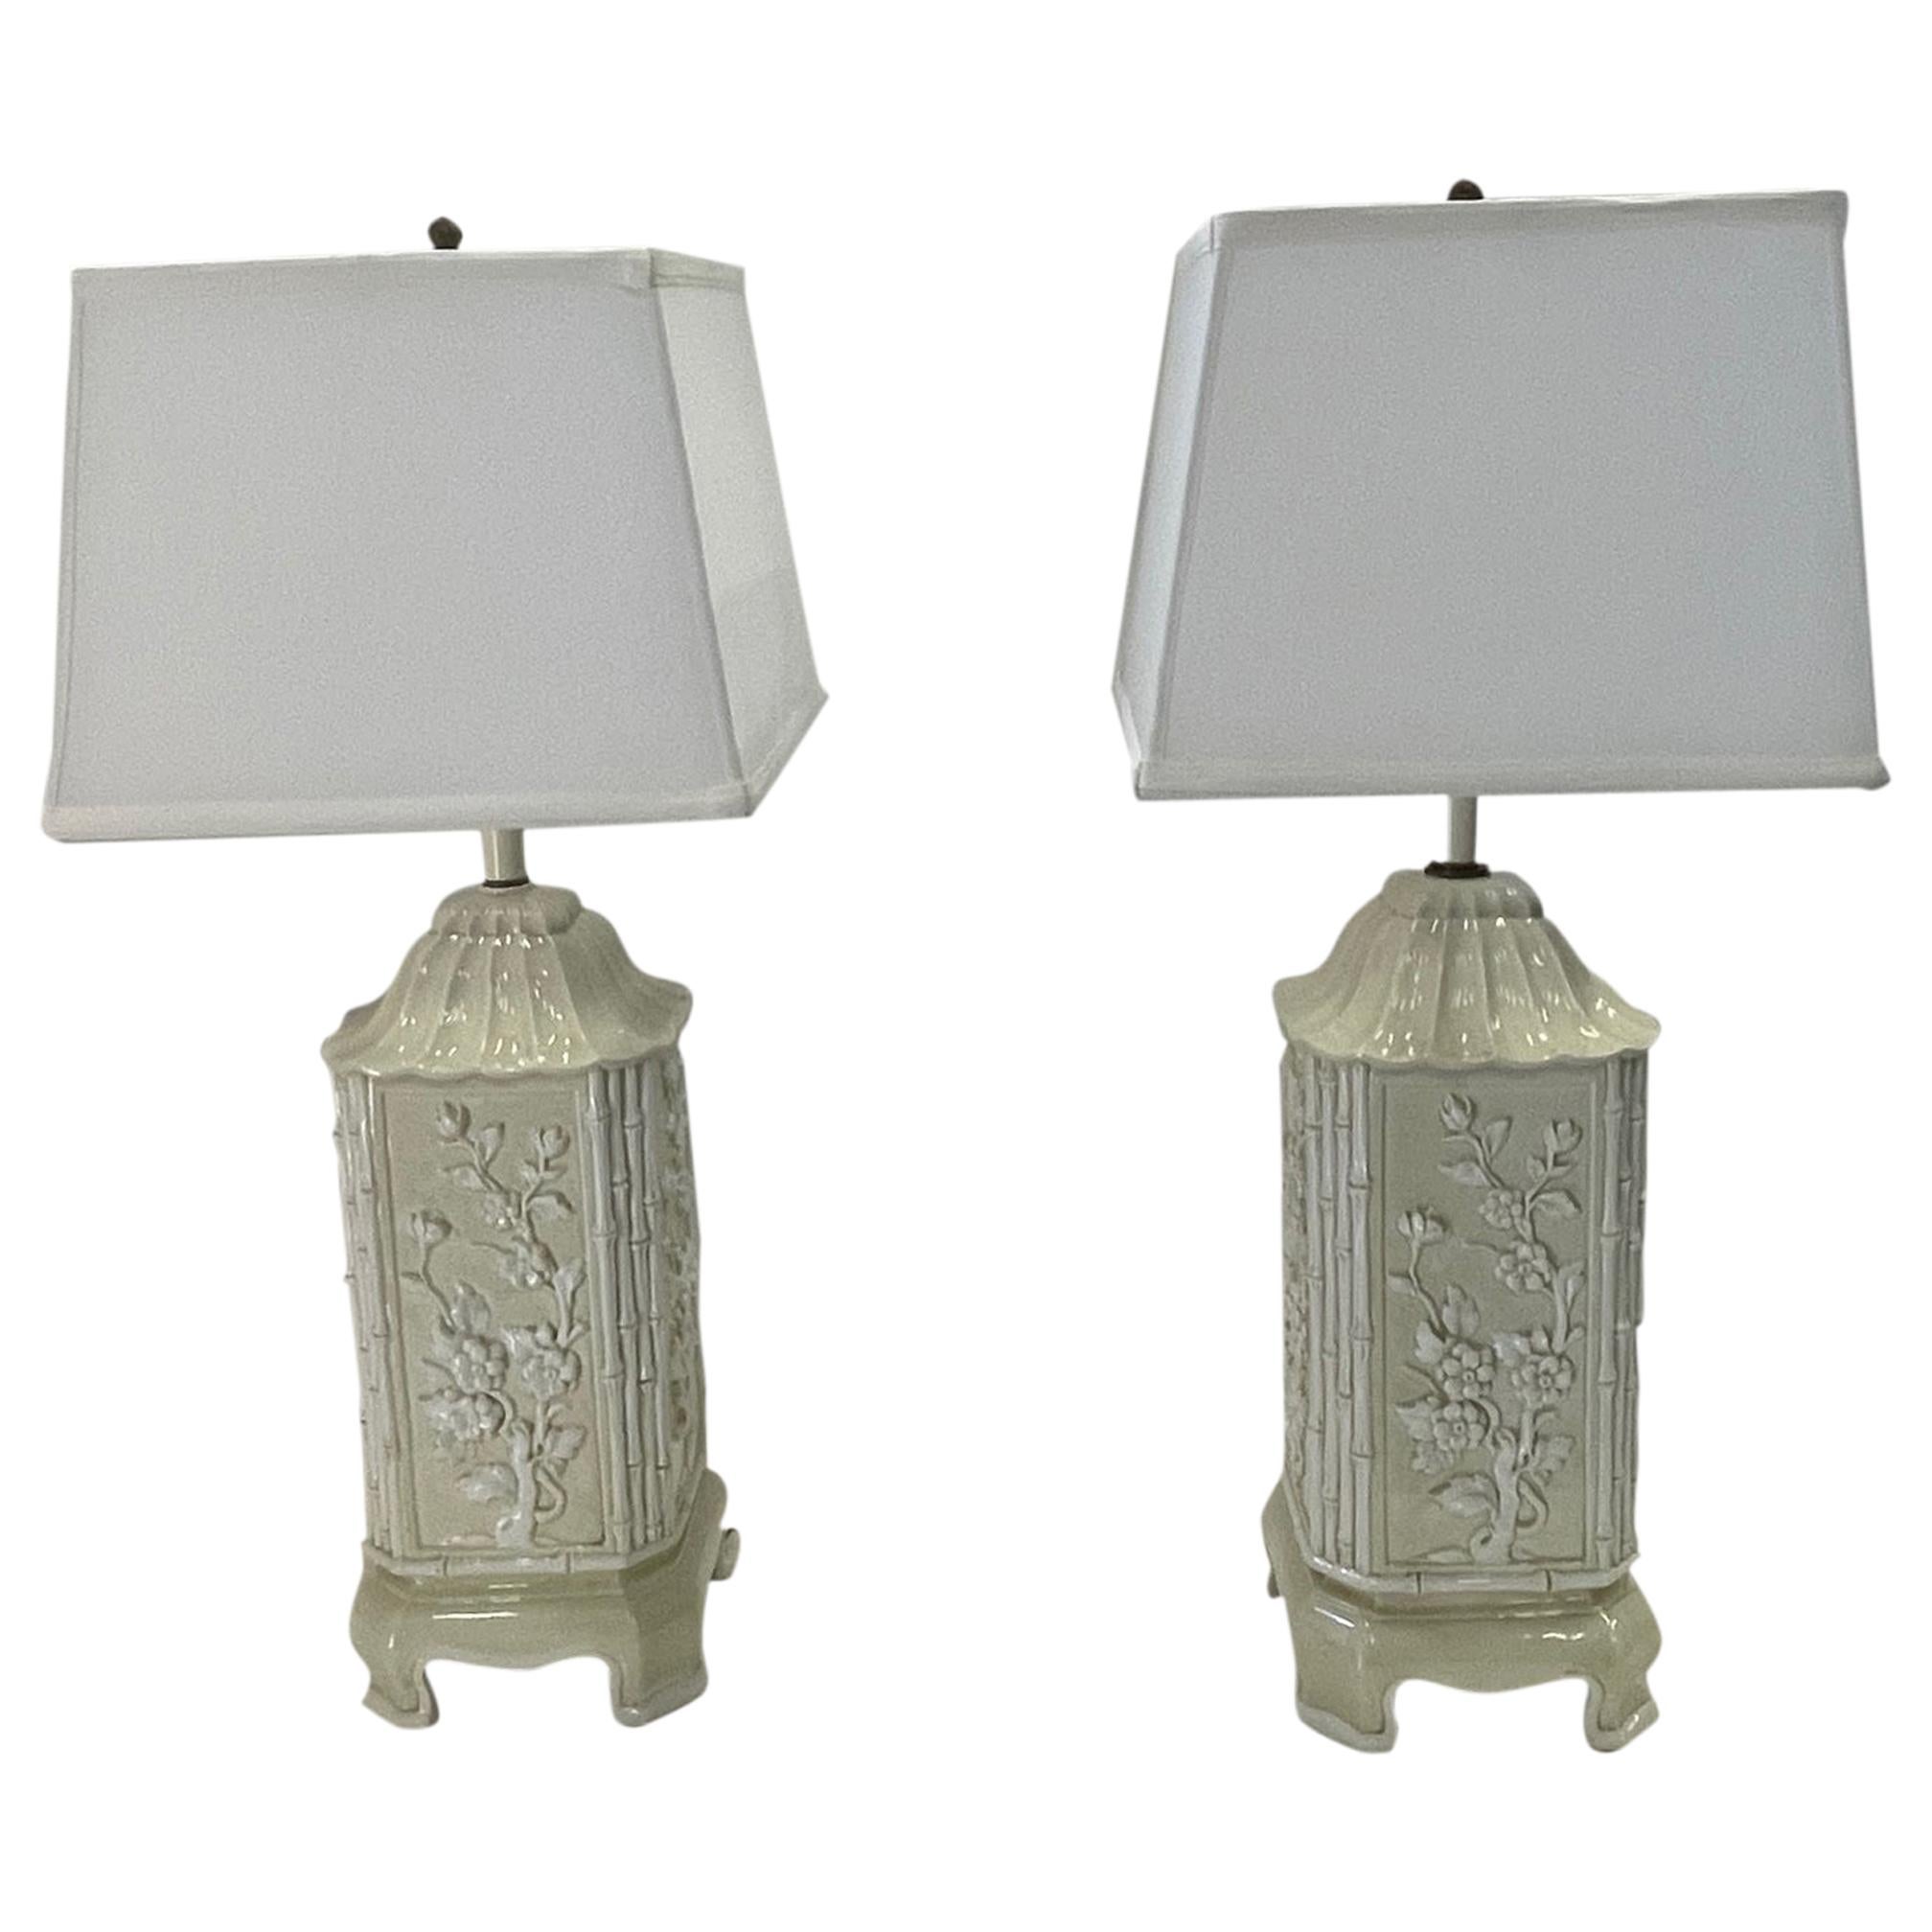 Pair of Pagoda Shaped Italian Ceramic Table Lamps with Bamboo and Flowers